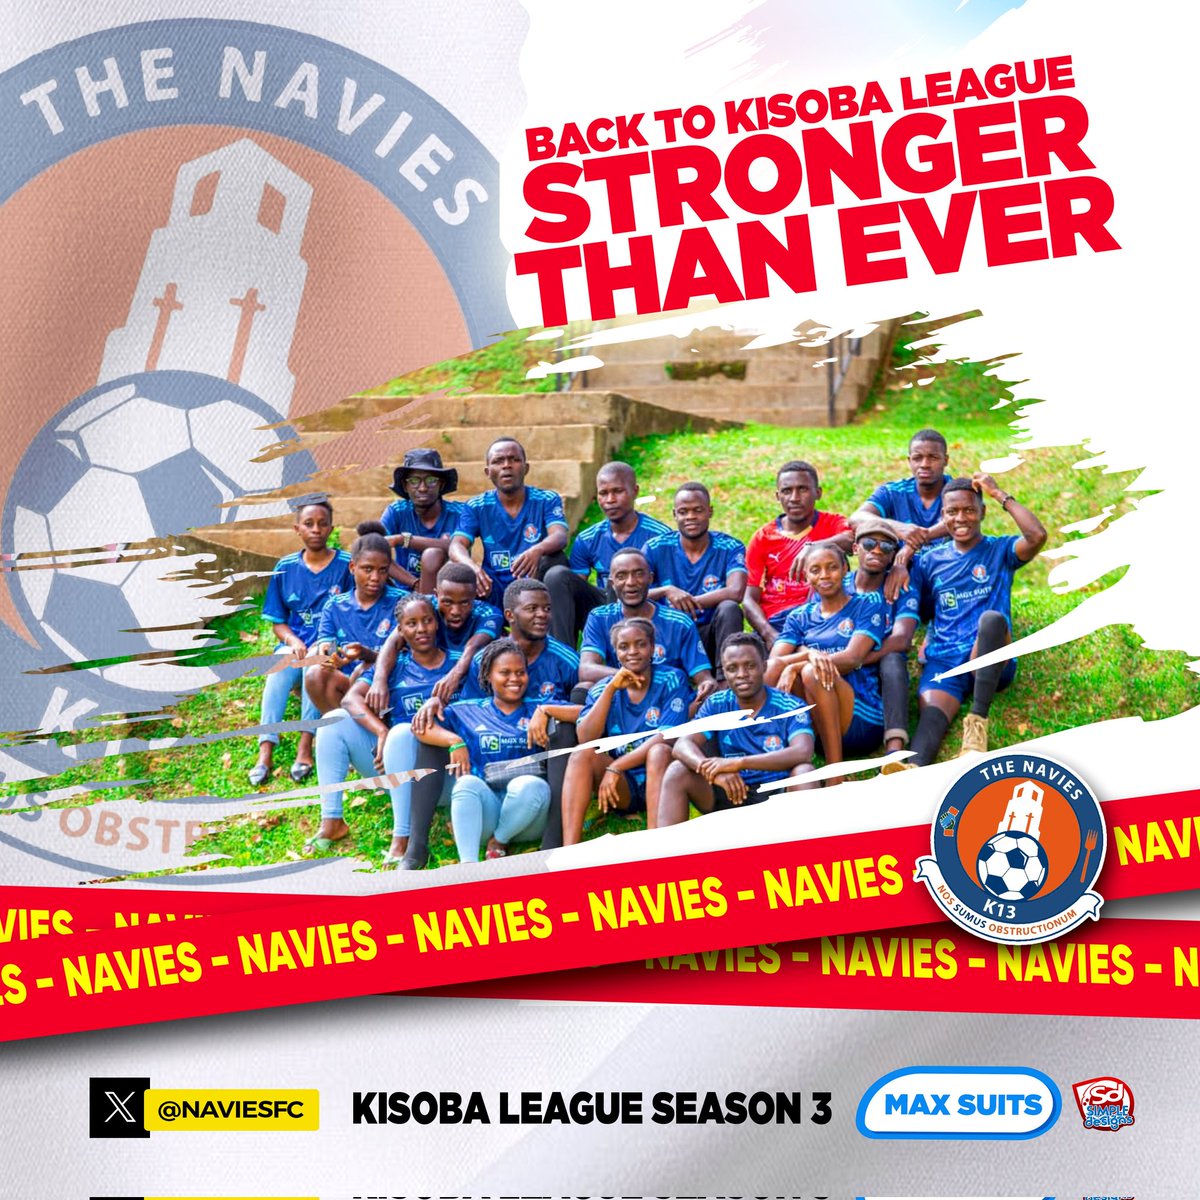 📌 CONFIRMED: This Sunday 14th April we're balling again ' KISOBA LEAGUE RETURNS ' . Thank ya'll for the support and much love from us @NaviesFC ❤👏 #KLReturns